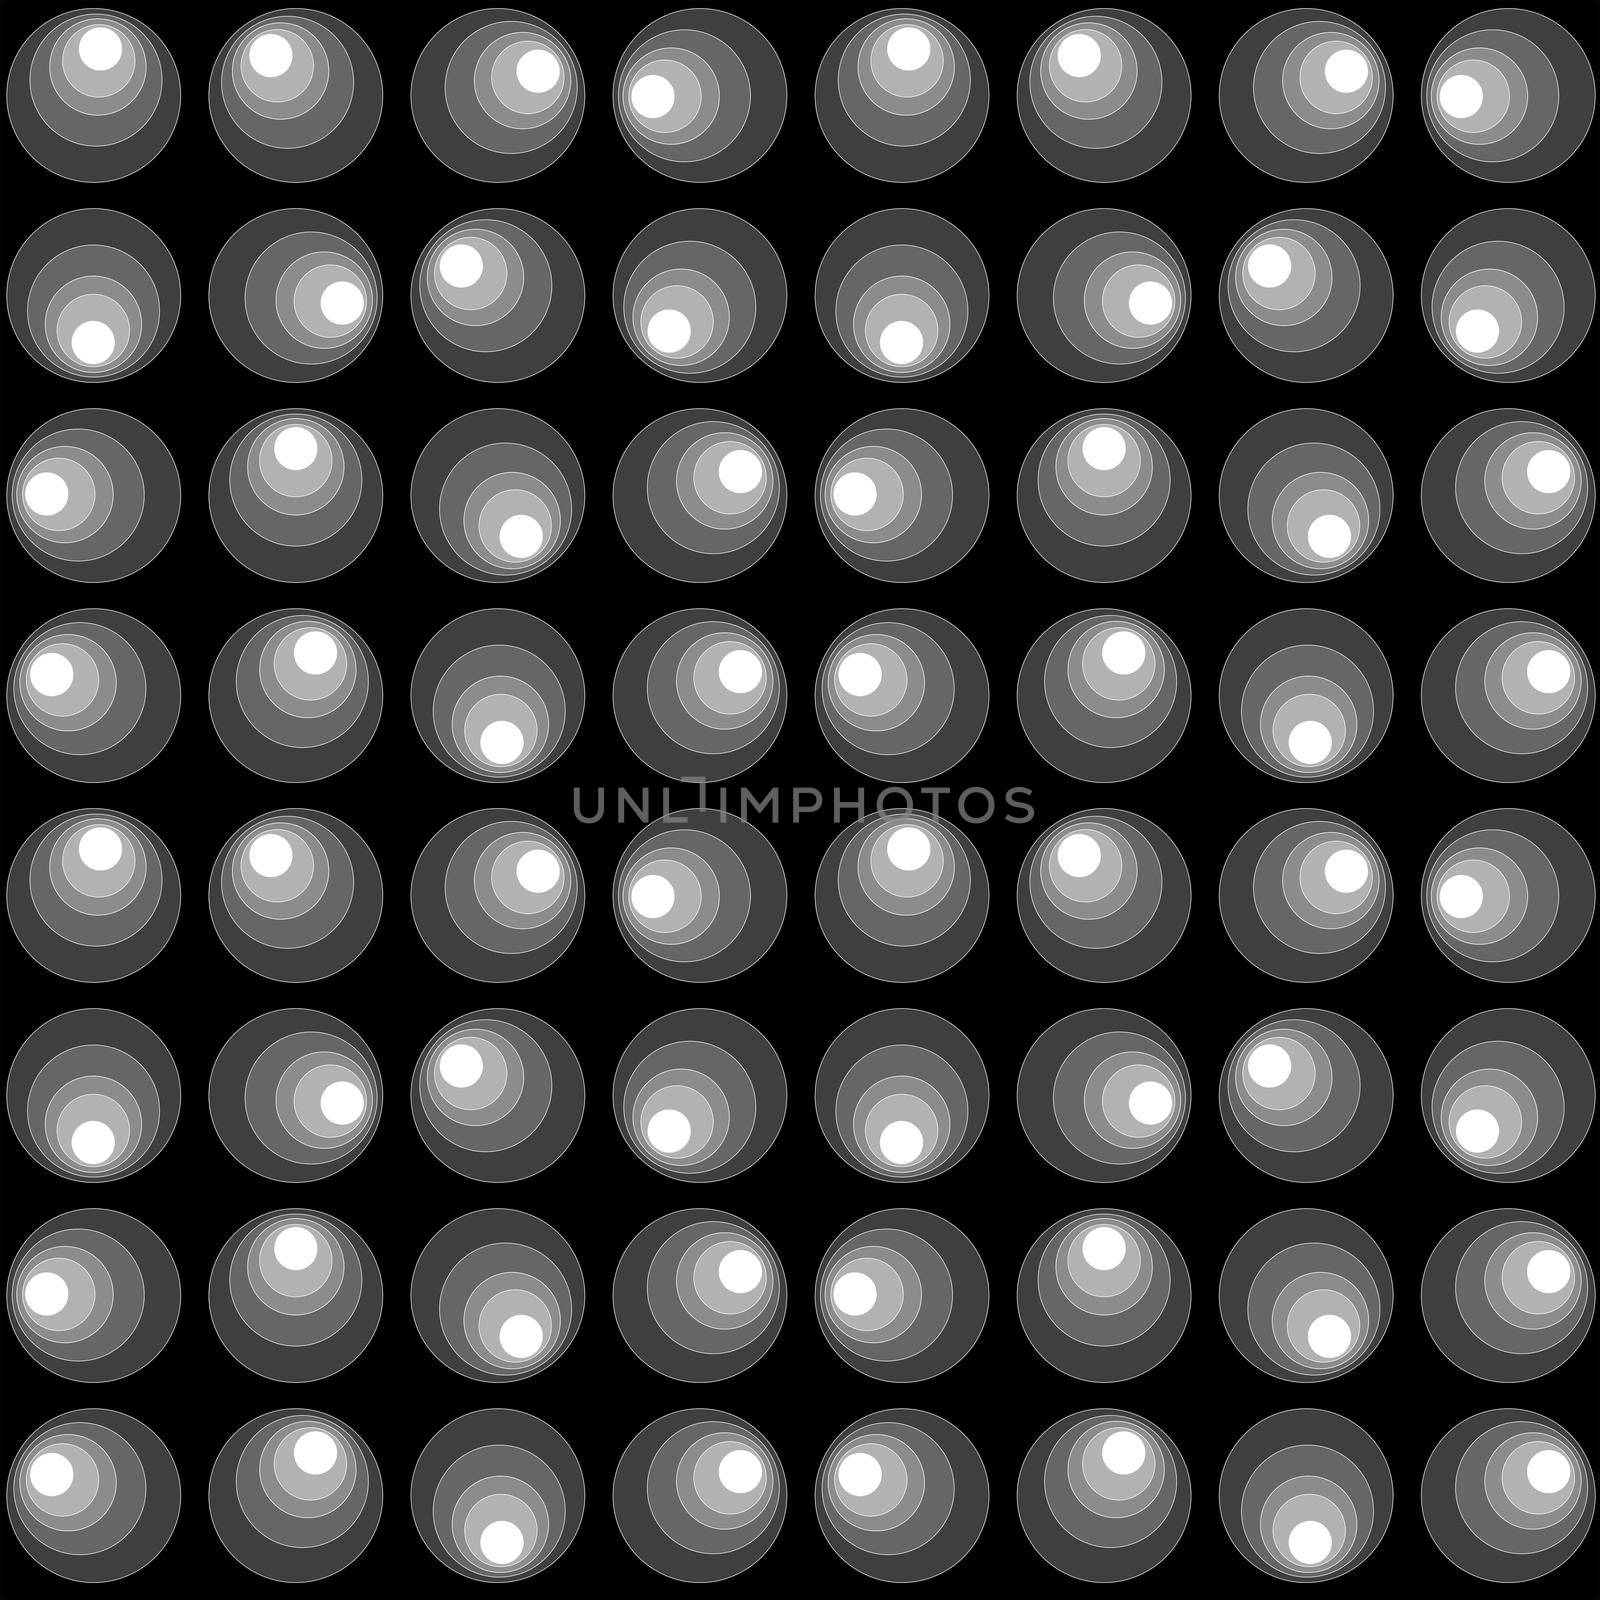 Abstract geometrical pattern with circles over black background by hibrida13